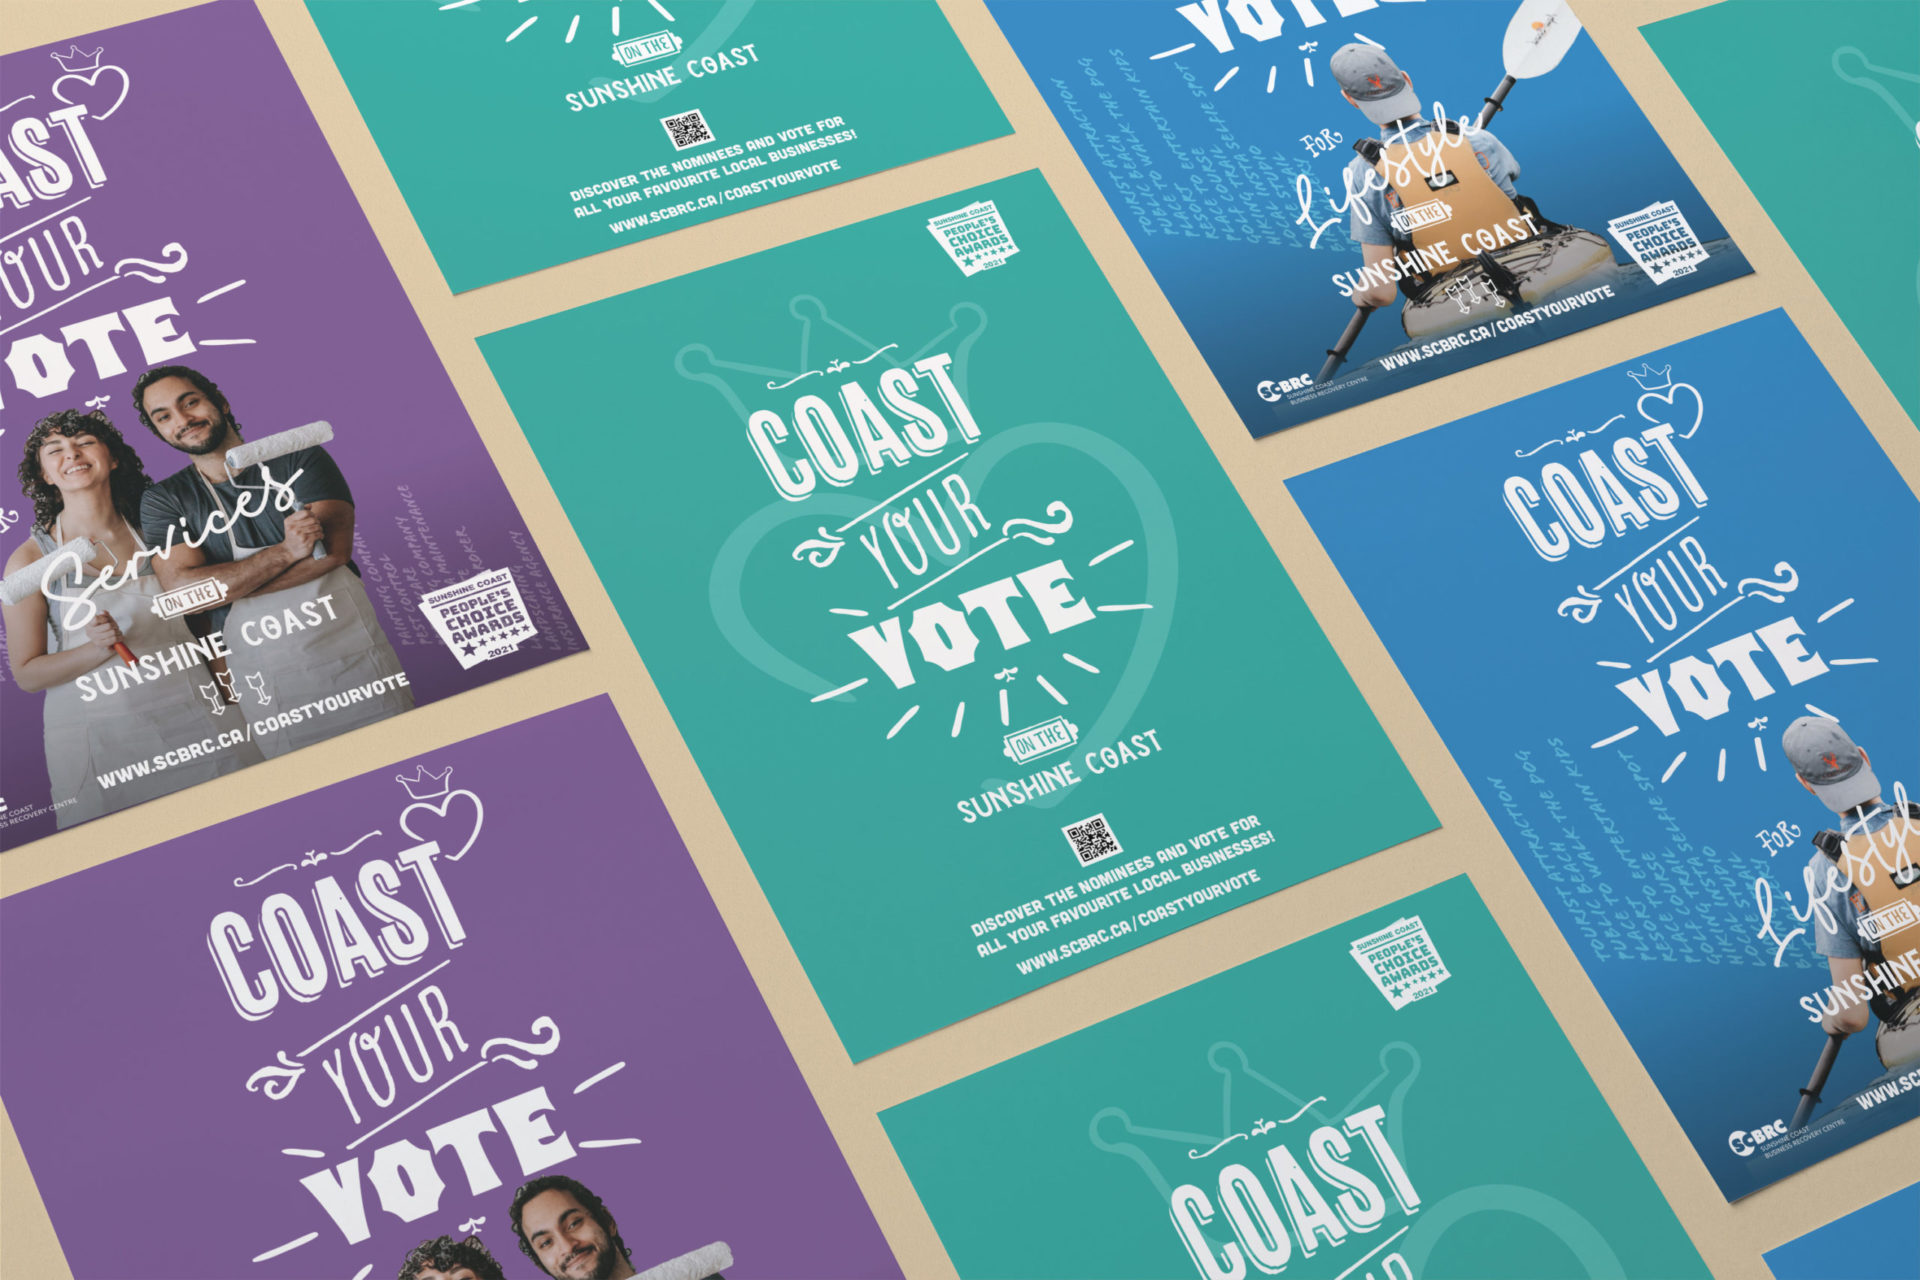 Custom poster print design and layout for coast your vote campaign